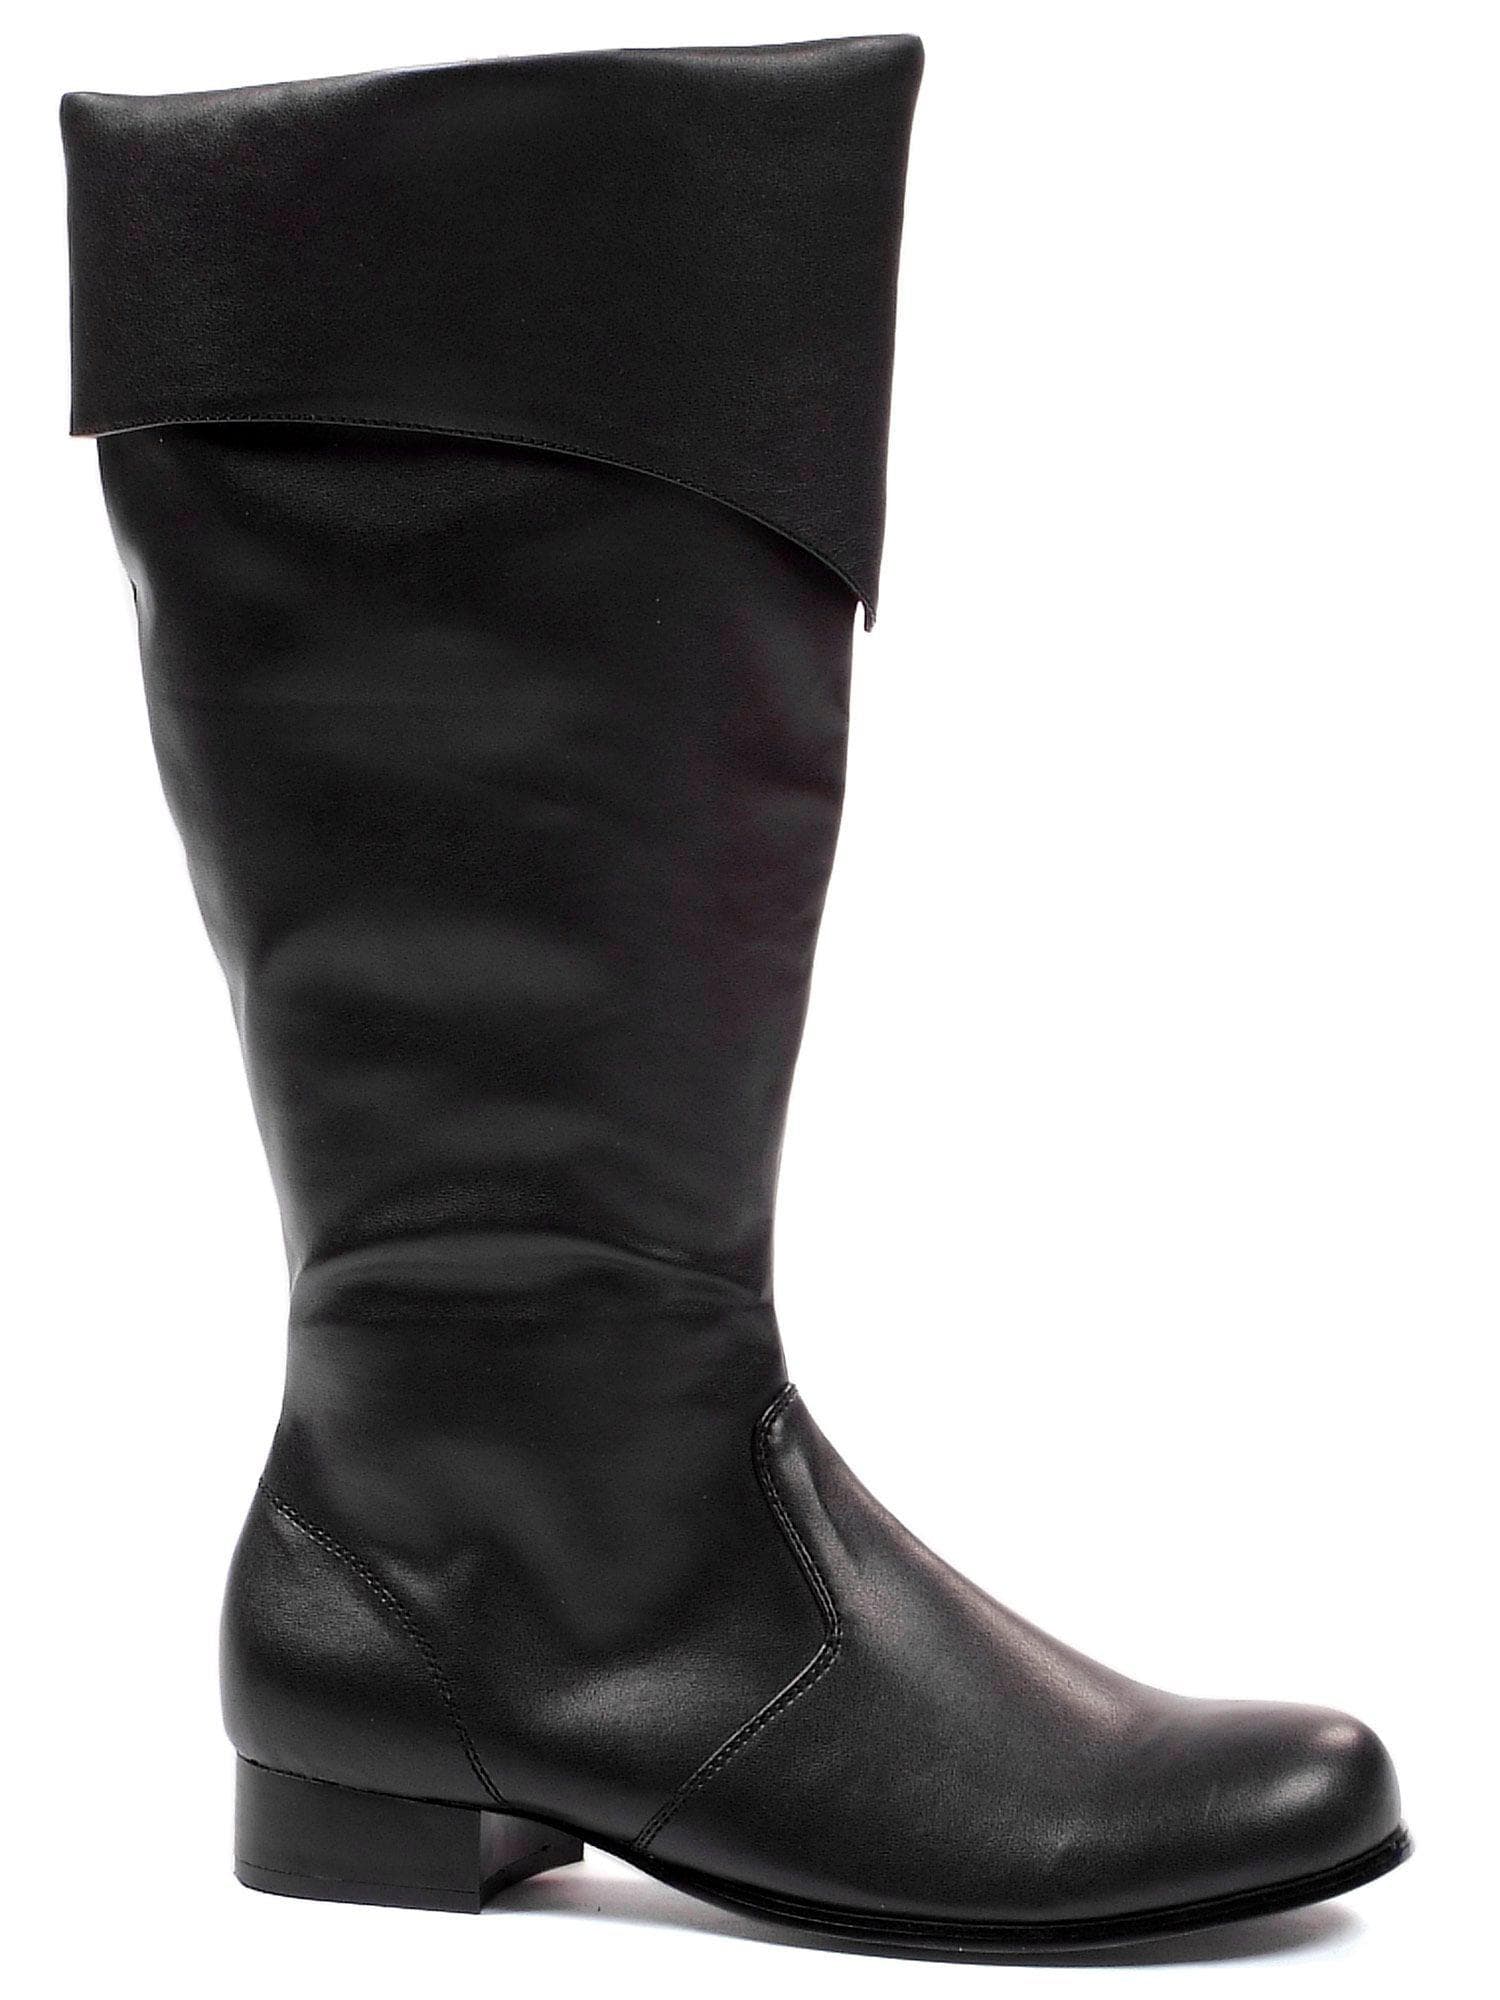 Adult Black Tall Pirate Boots - costumes.com